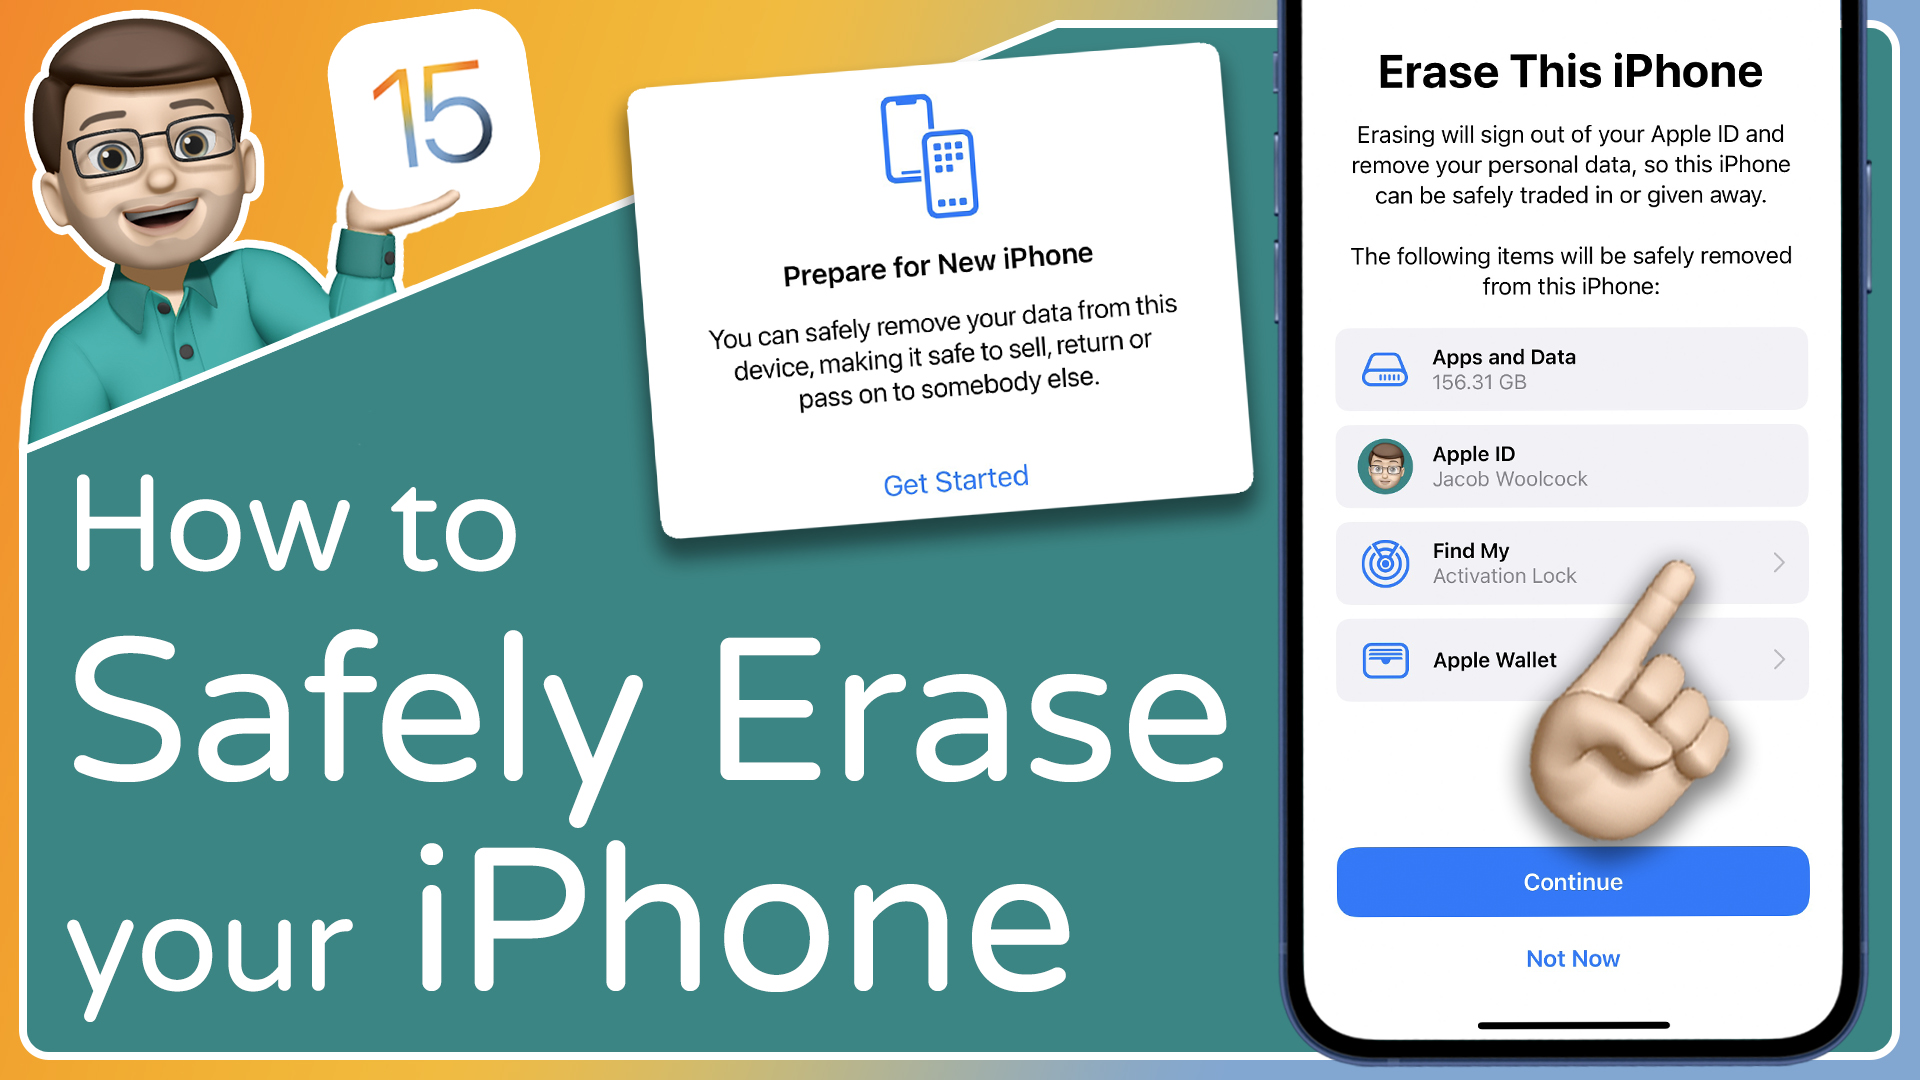 How to Safely Erase your iPhone